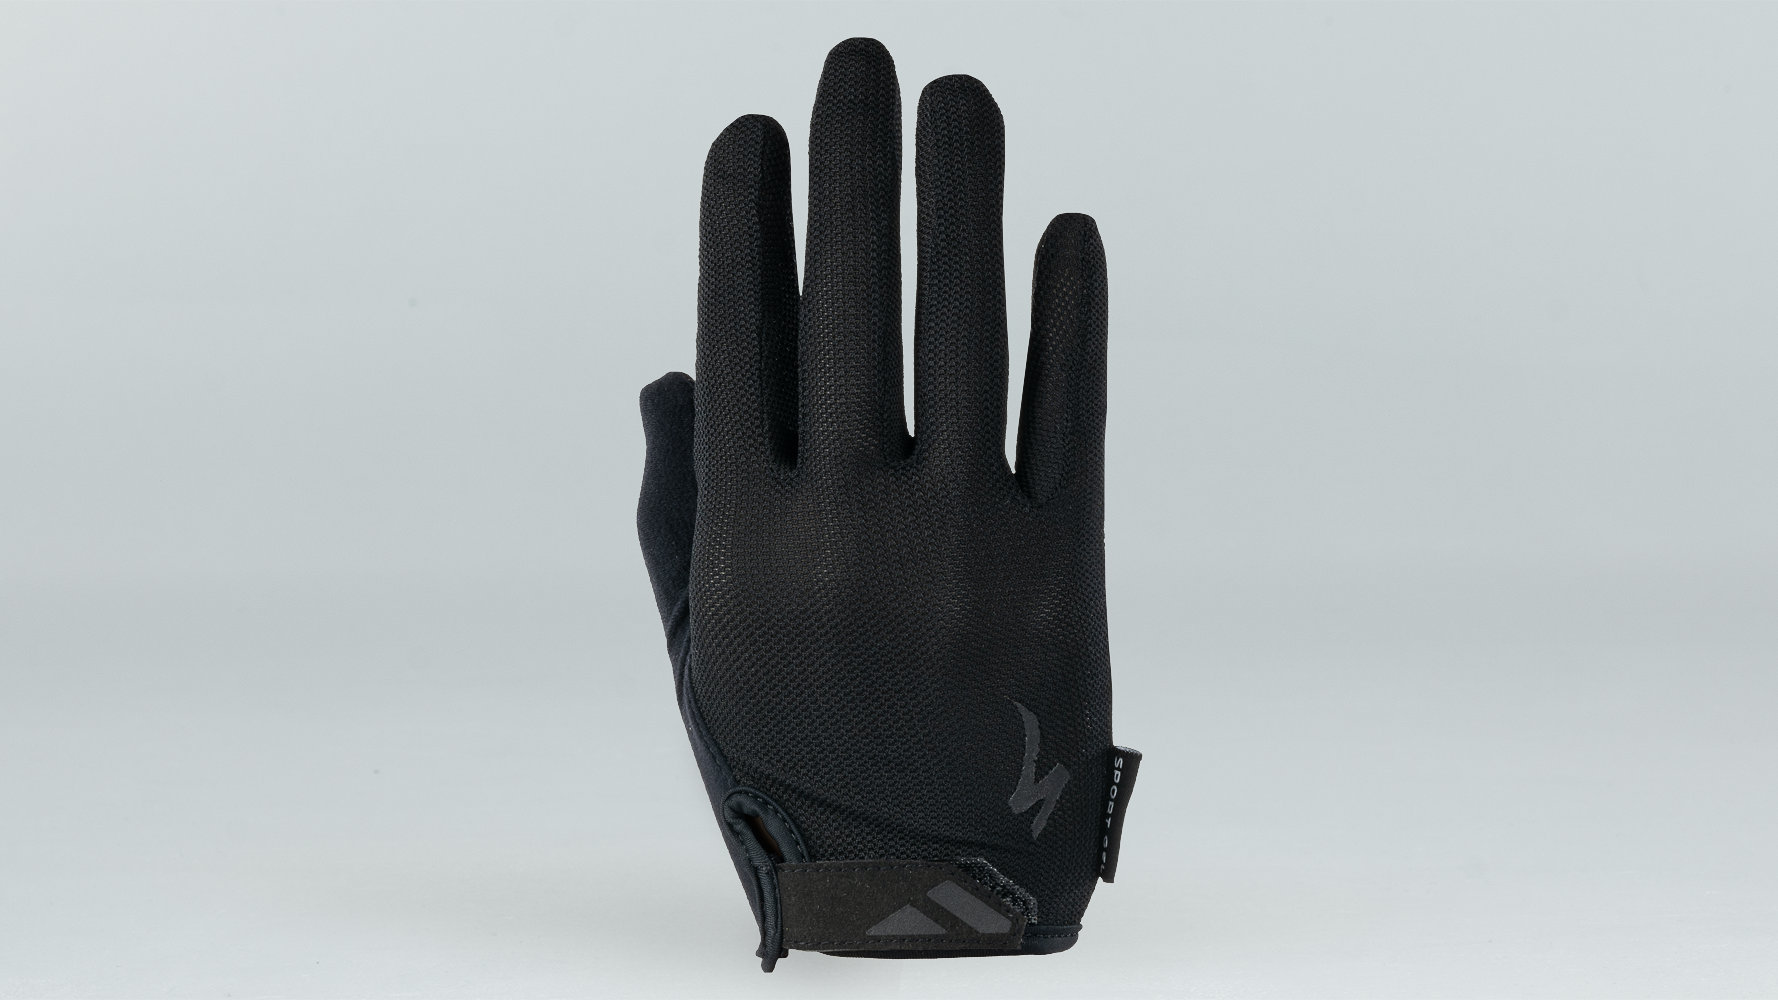 specialized cycling gloves uk